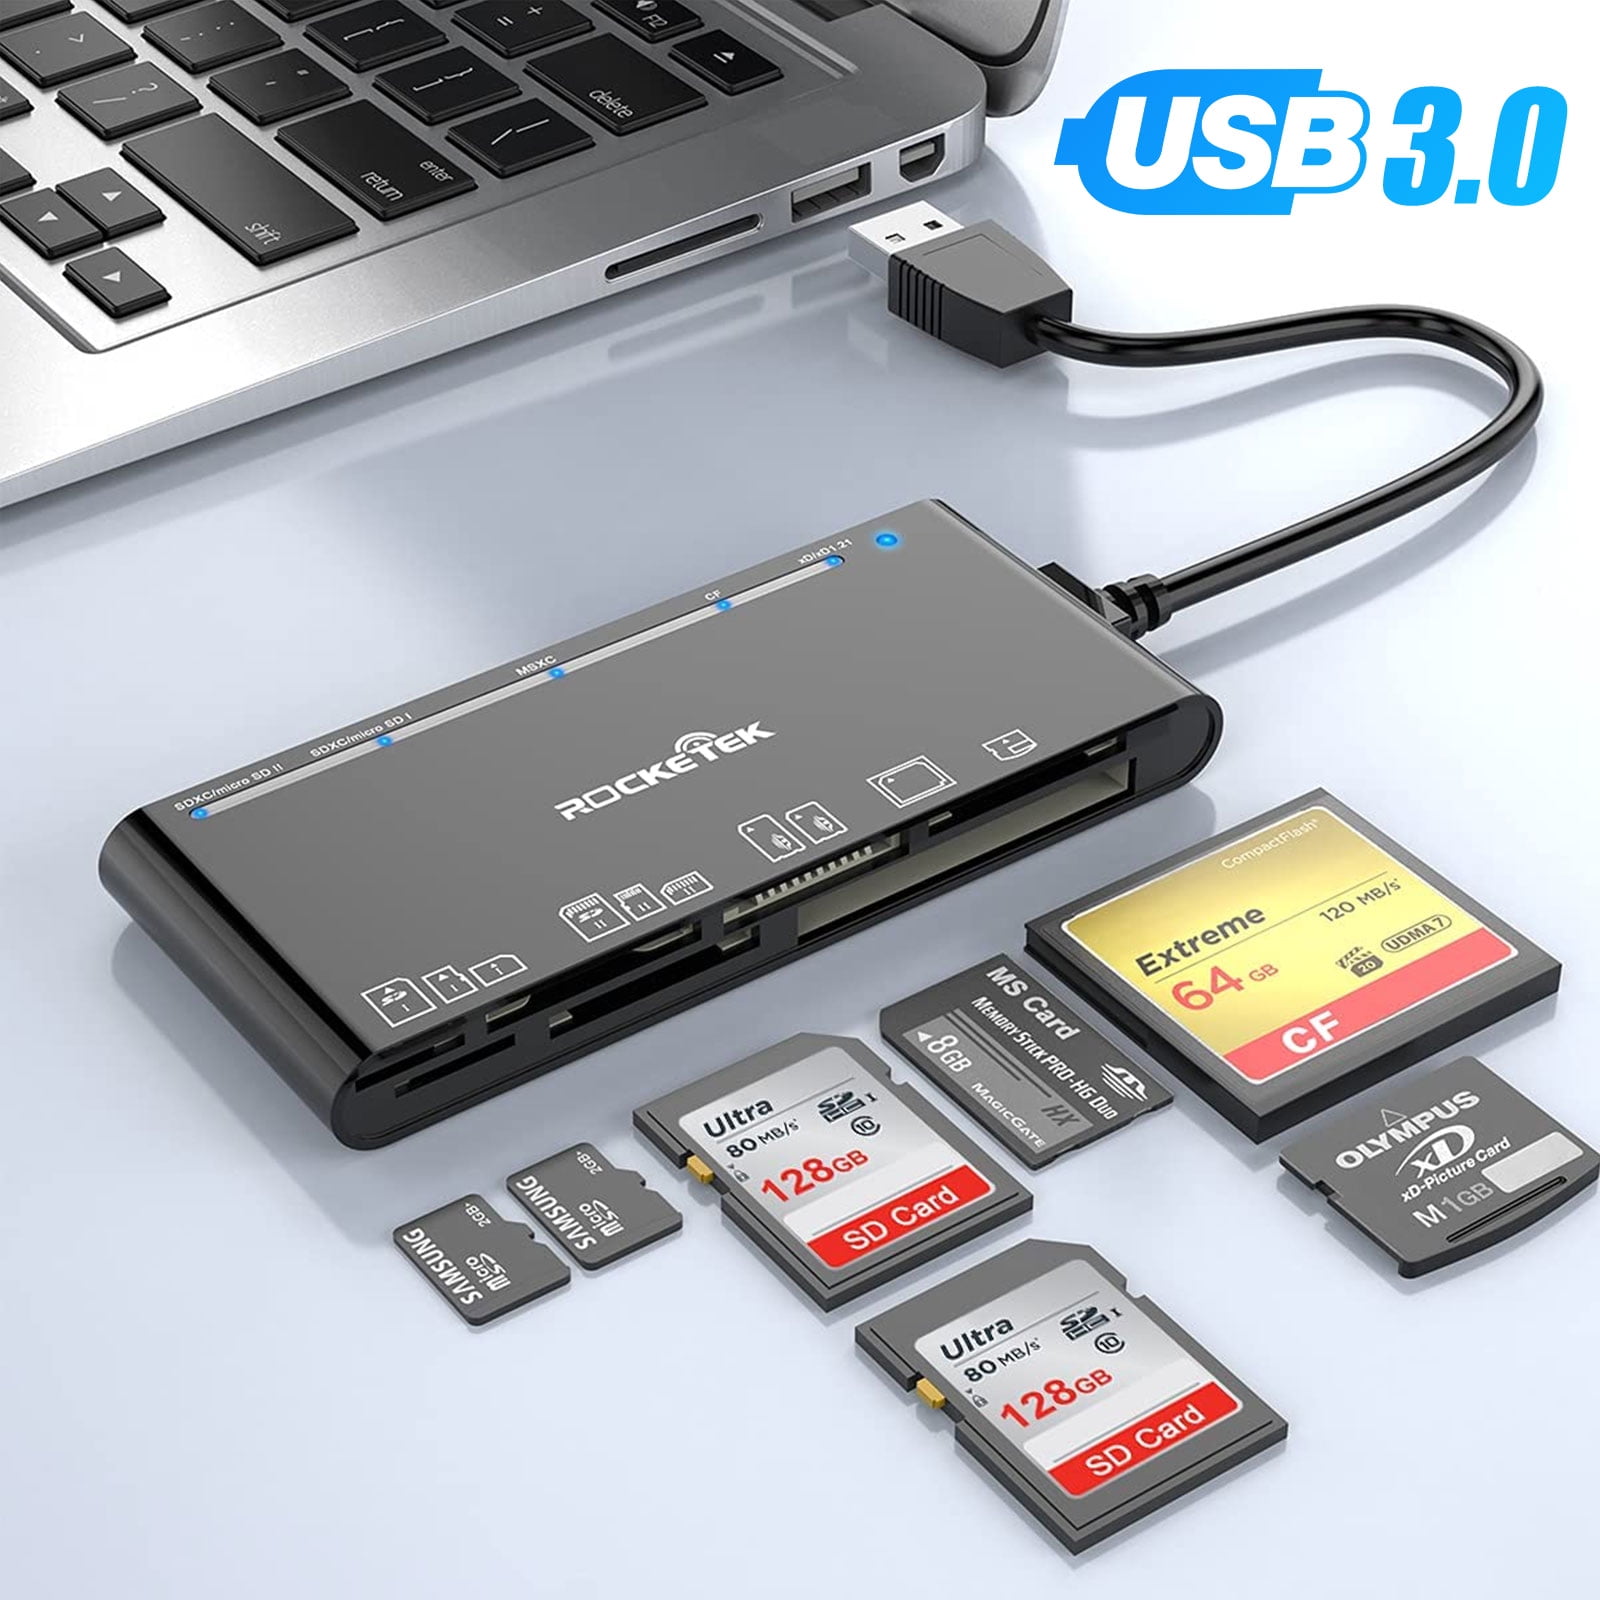 rolle Credential Opmuntring USB 3.0 SD Card Reader, TSV Multi Ports Smart Card Reader USB 3.0 Micro SD  Camera Card Reader for Micro SD/SDXC/CF/SD/SDHC/MS/XD/T-Flash/MMC, Supports  5 Memory Card Reading Writing Simultaneously 2TB - Walmart.com